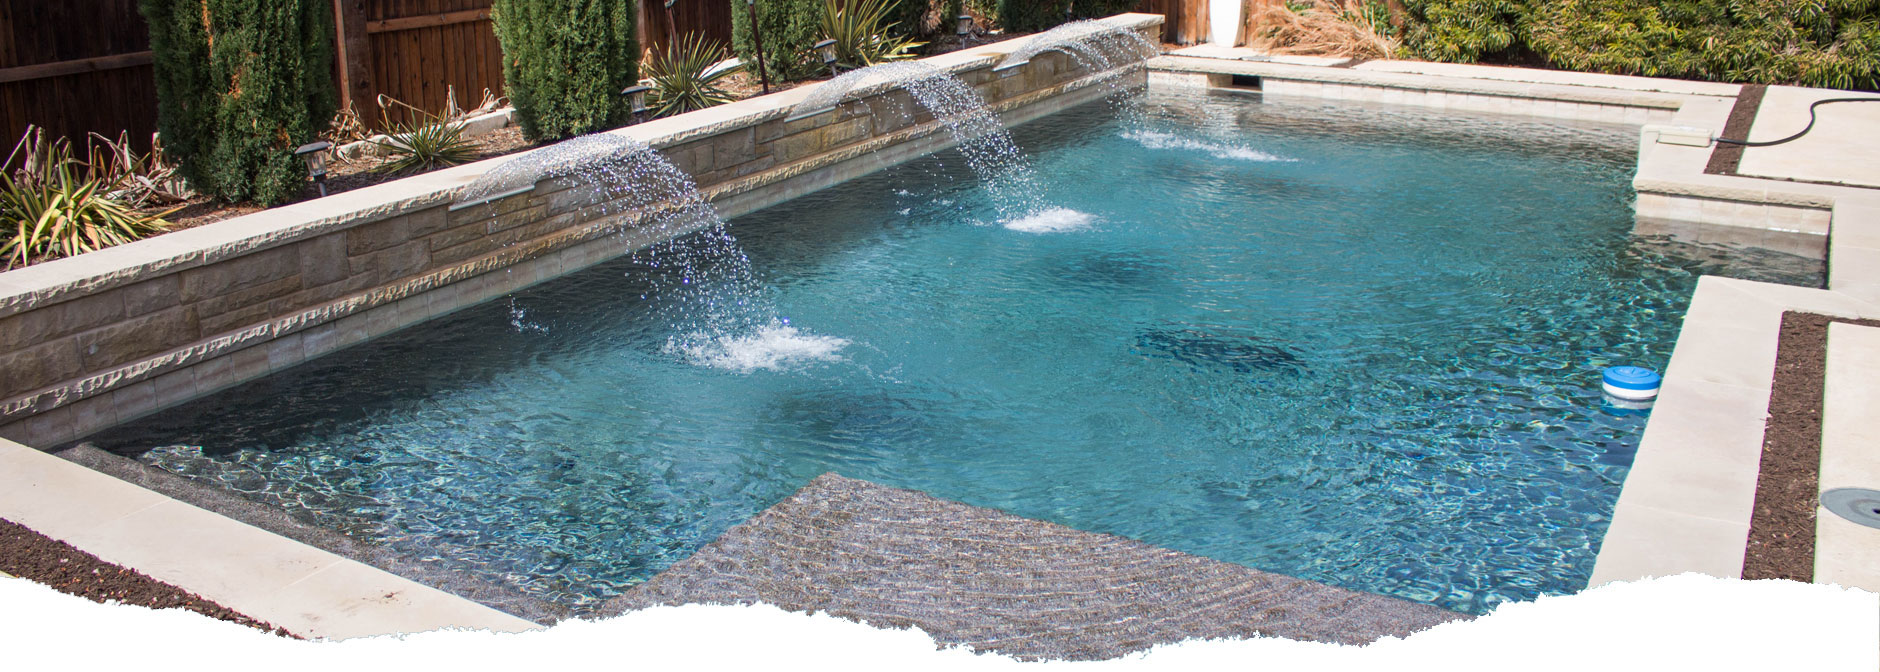 Picture of a rectangular pool with blue water and three water fall features shooting water into the pool.